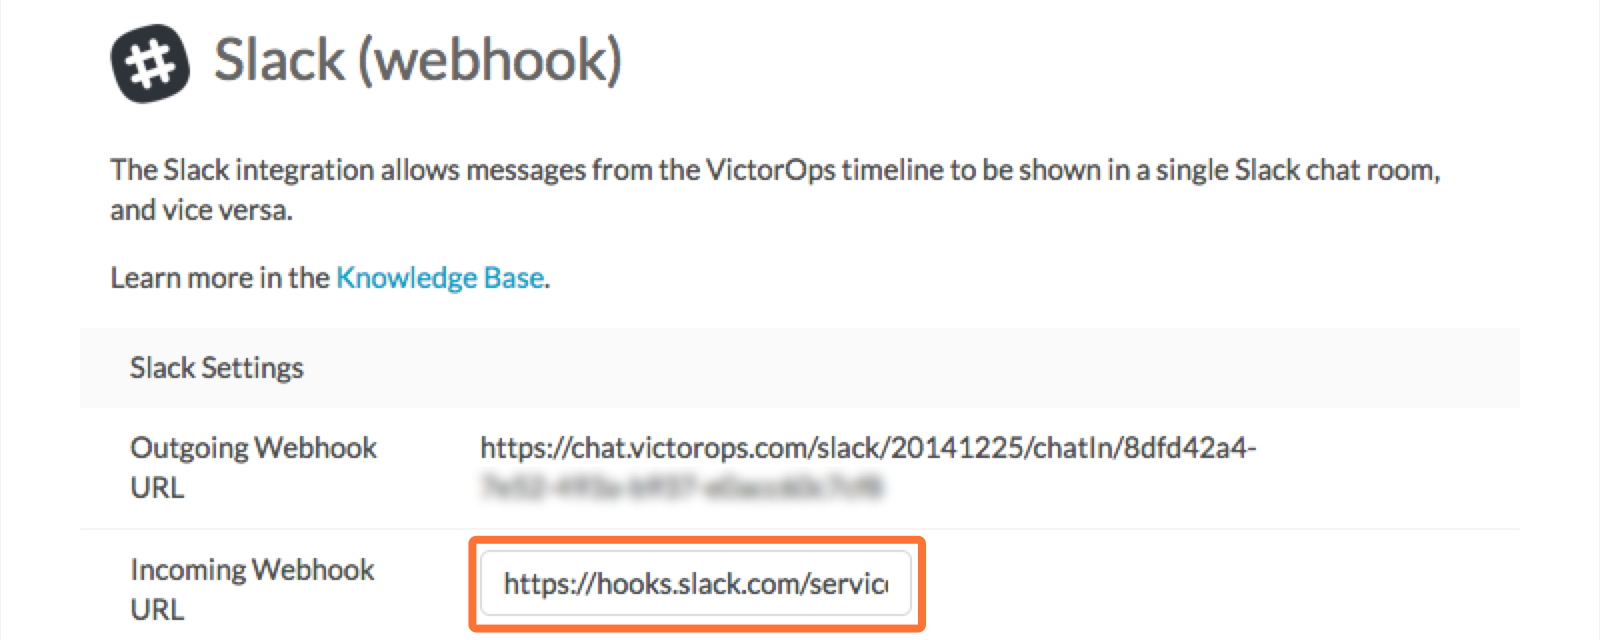 Paste the URL into the Incoming Webhook URL section.